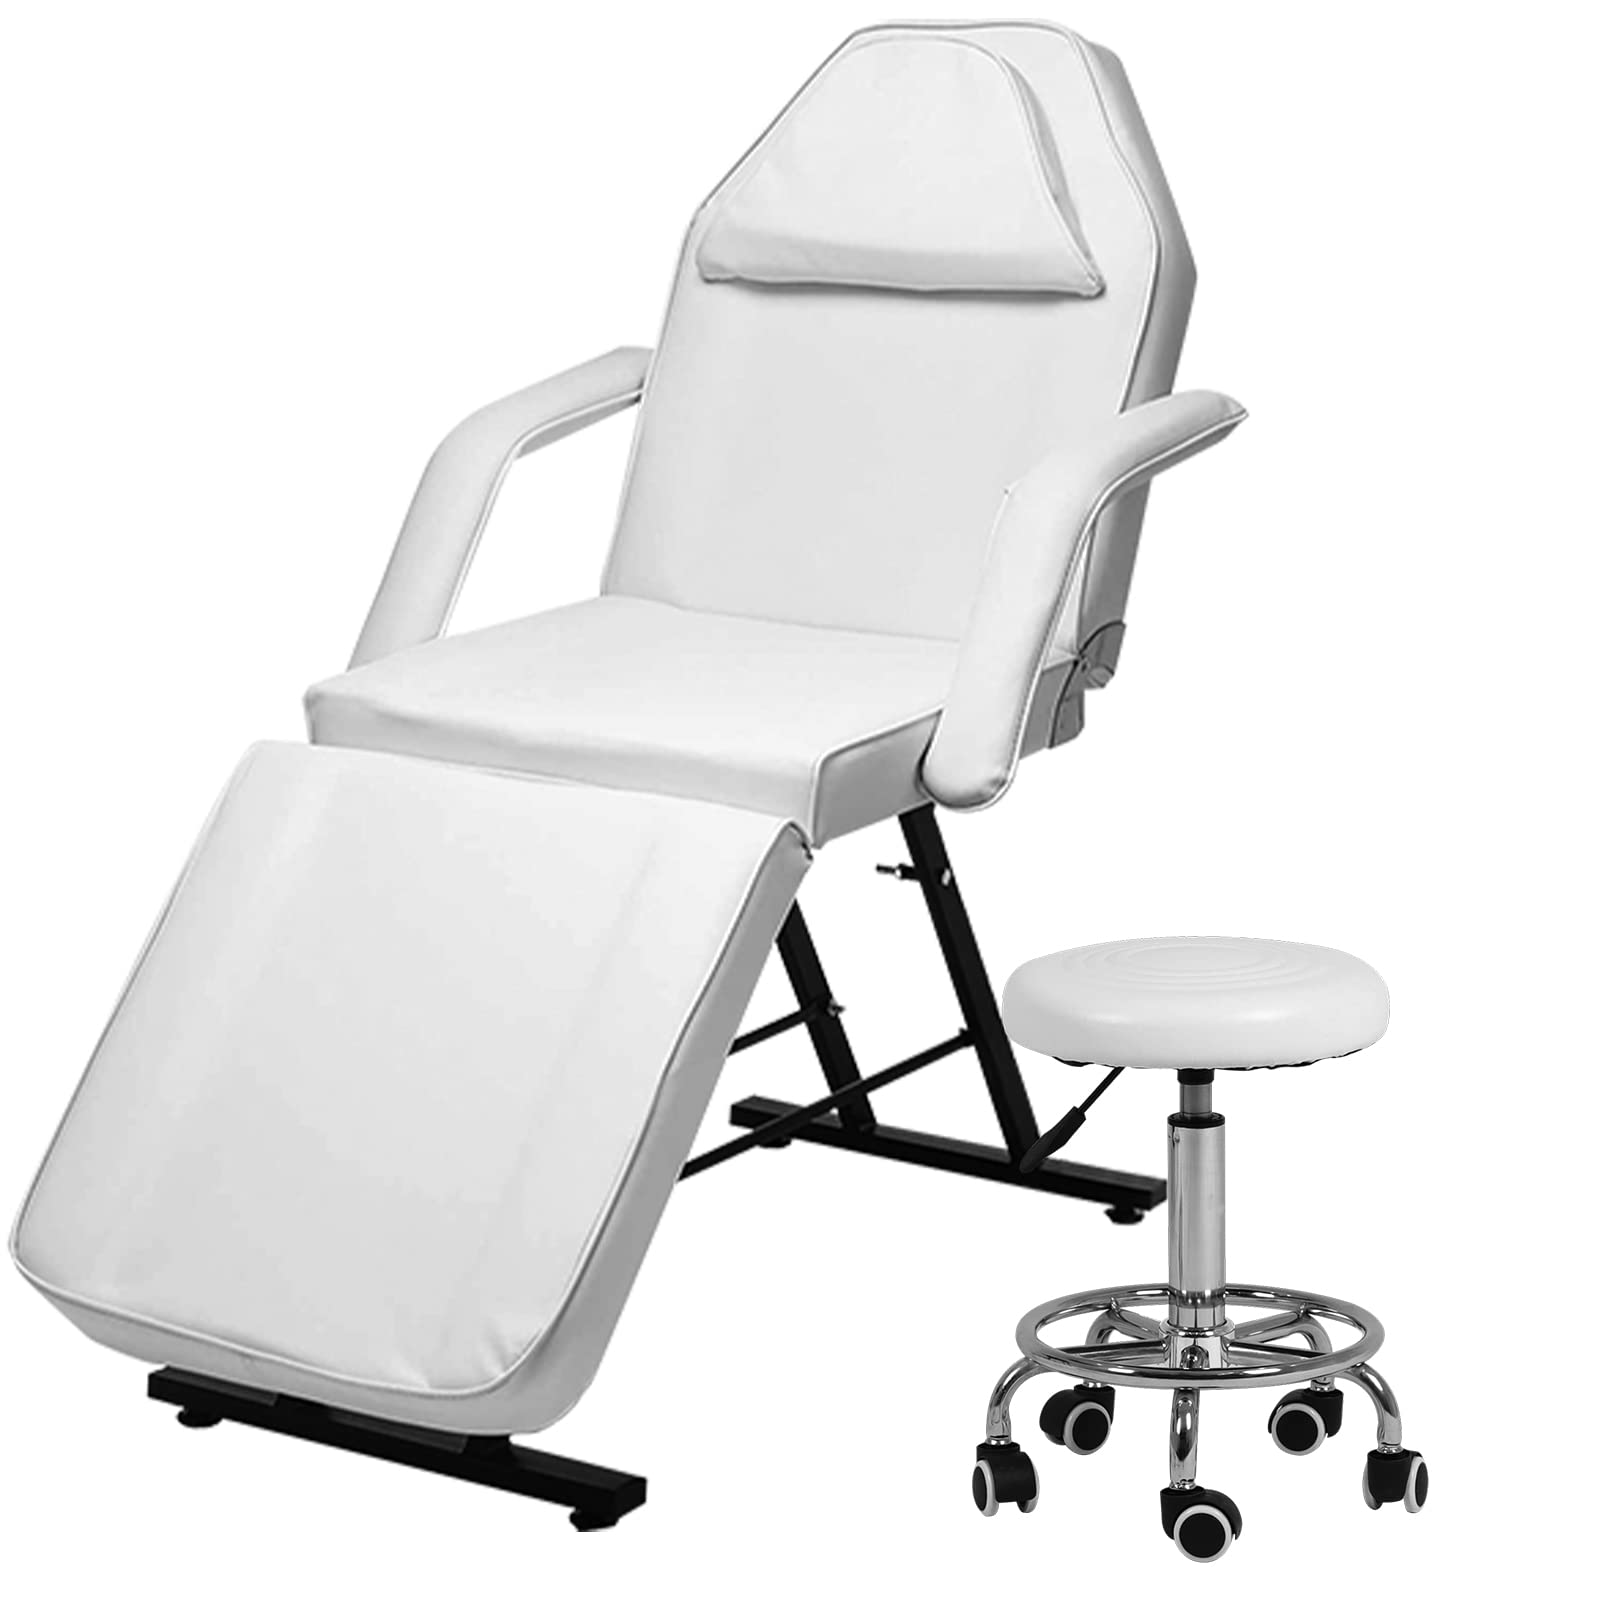 Jumborich All in one Massage Bed with Chair White - IZZAT DAOUK SA